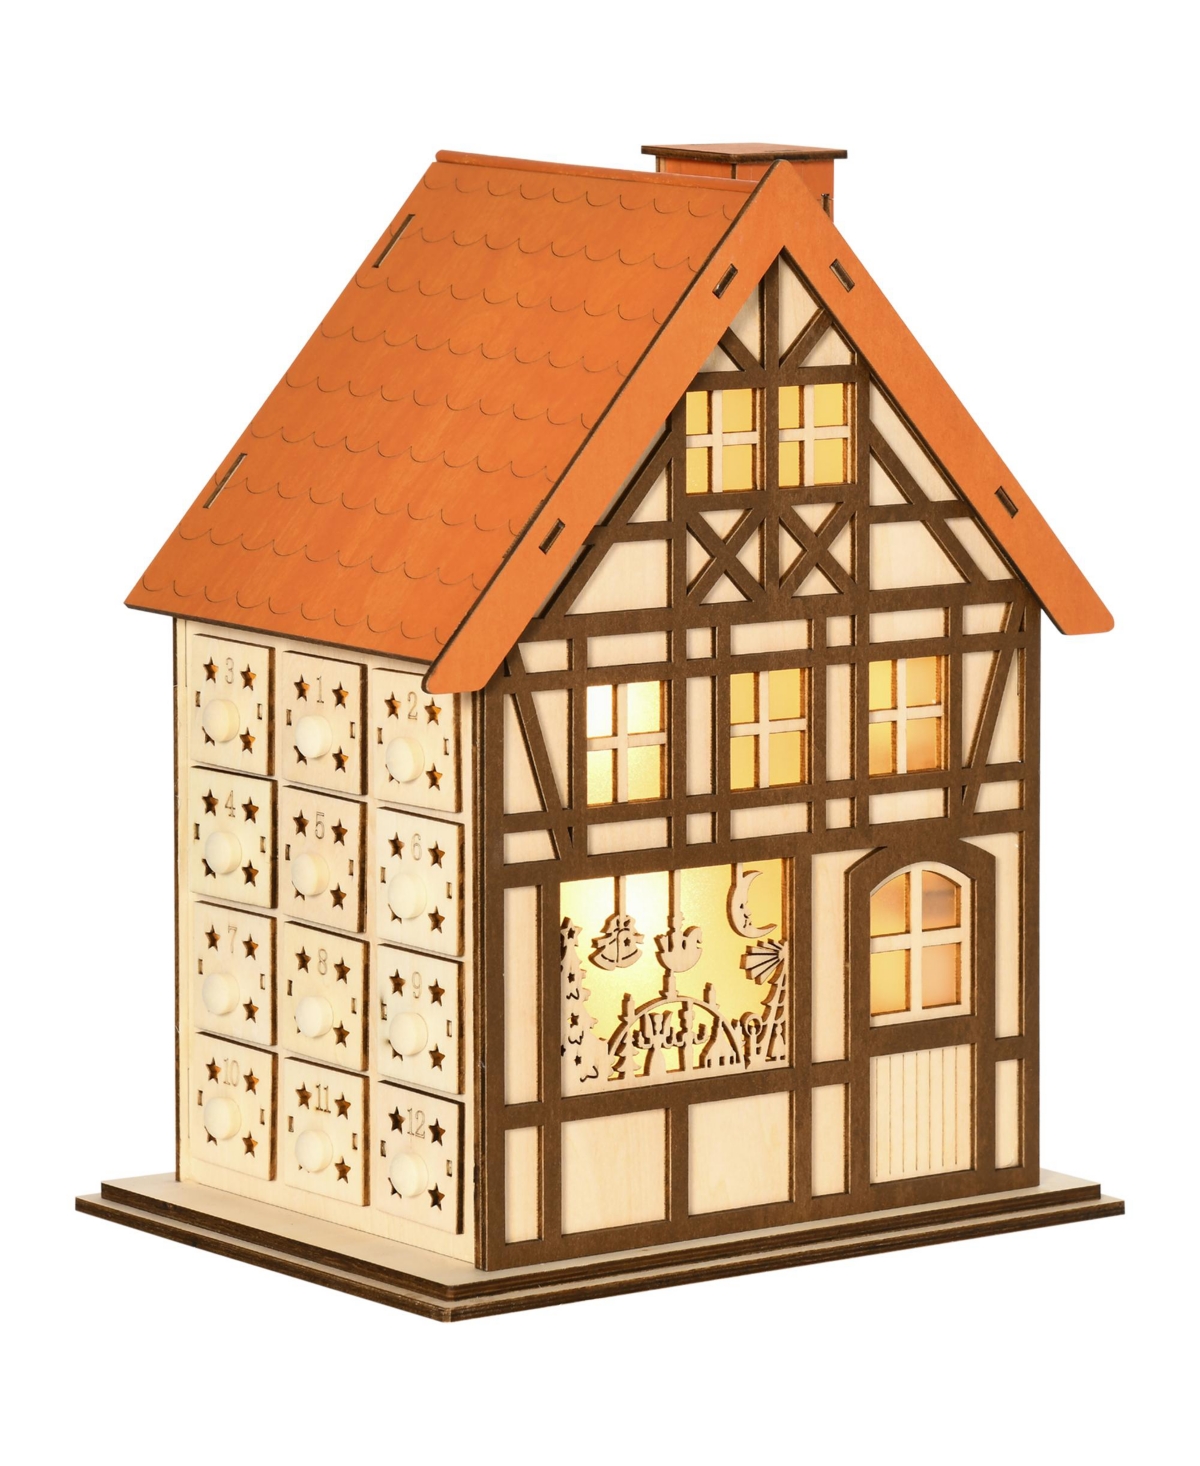 Wooden Christmas Advent Calendar House with 24 Drawers and Lights - Natural